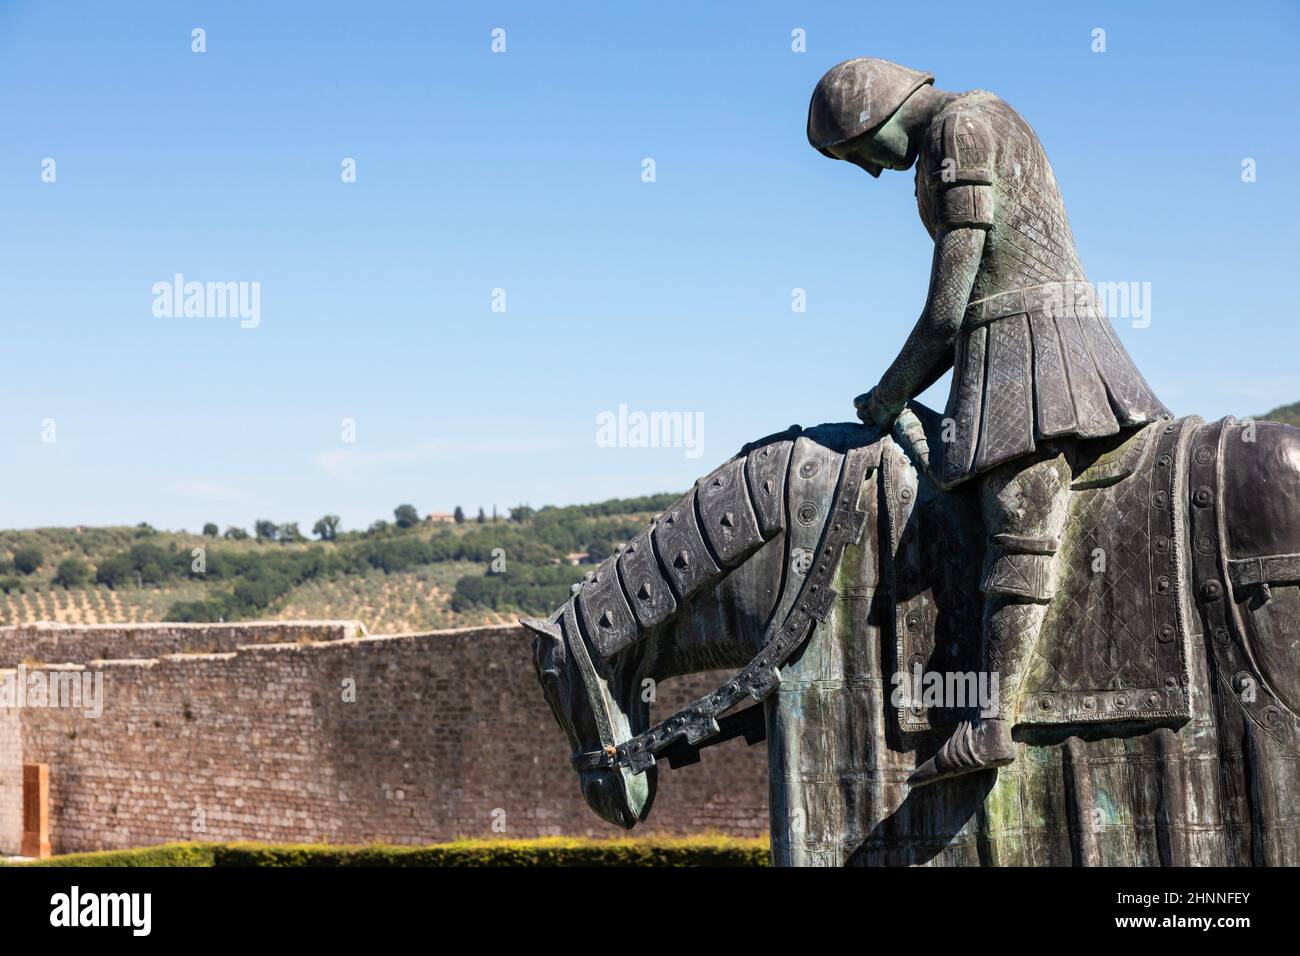 Assisi village in Umbria region, Italy. Statue of St. Francis. The town is famous for the most important Italian Basilica dedicated to St. Francis - San Francesco. Stock Photo